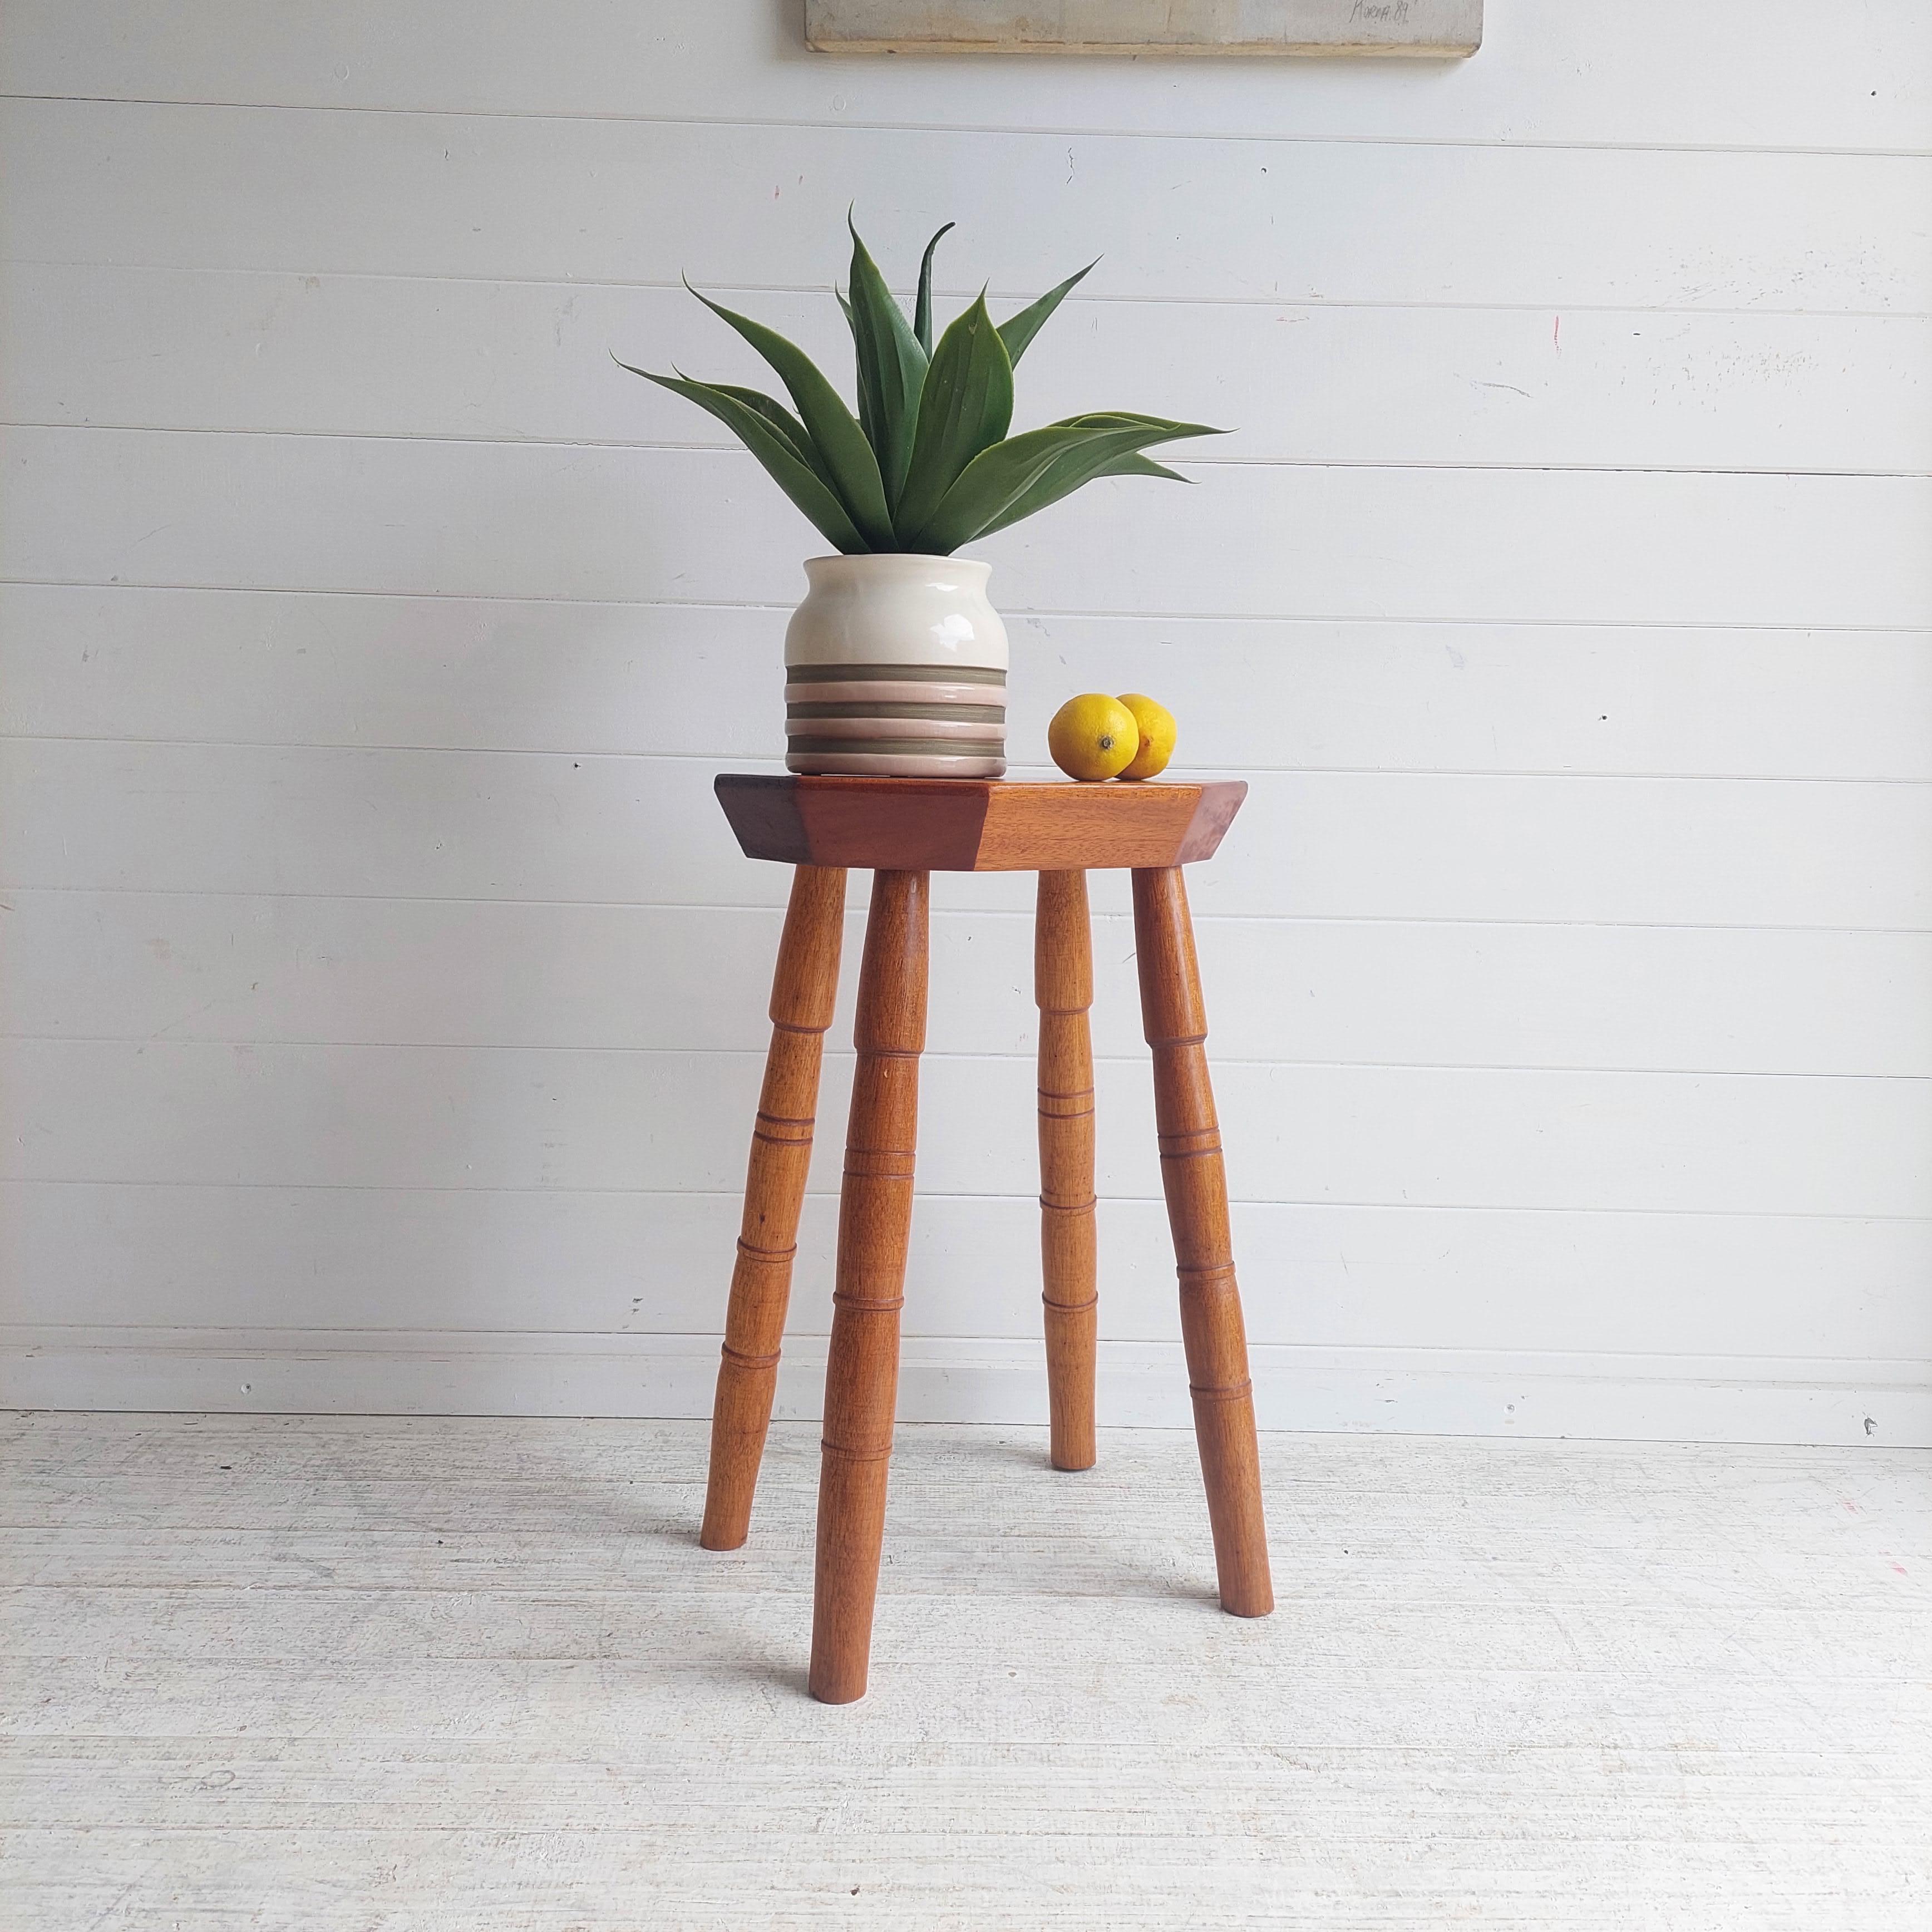 A wonderful probably French vintage stool with chunky bobbin legs. 
Estimated to be mid-late 20th century, 1960s

Very nice model with a very nice quality of manufacture
Made, we believe, of Mahogany and oak which contrast